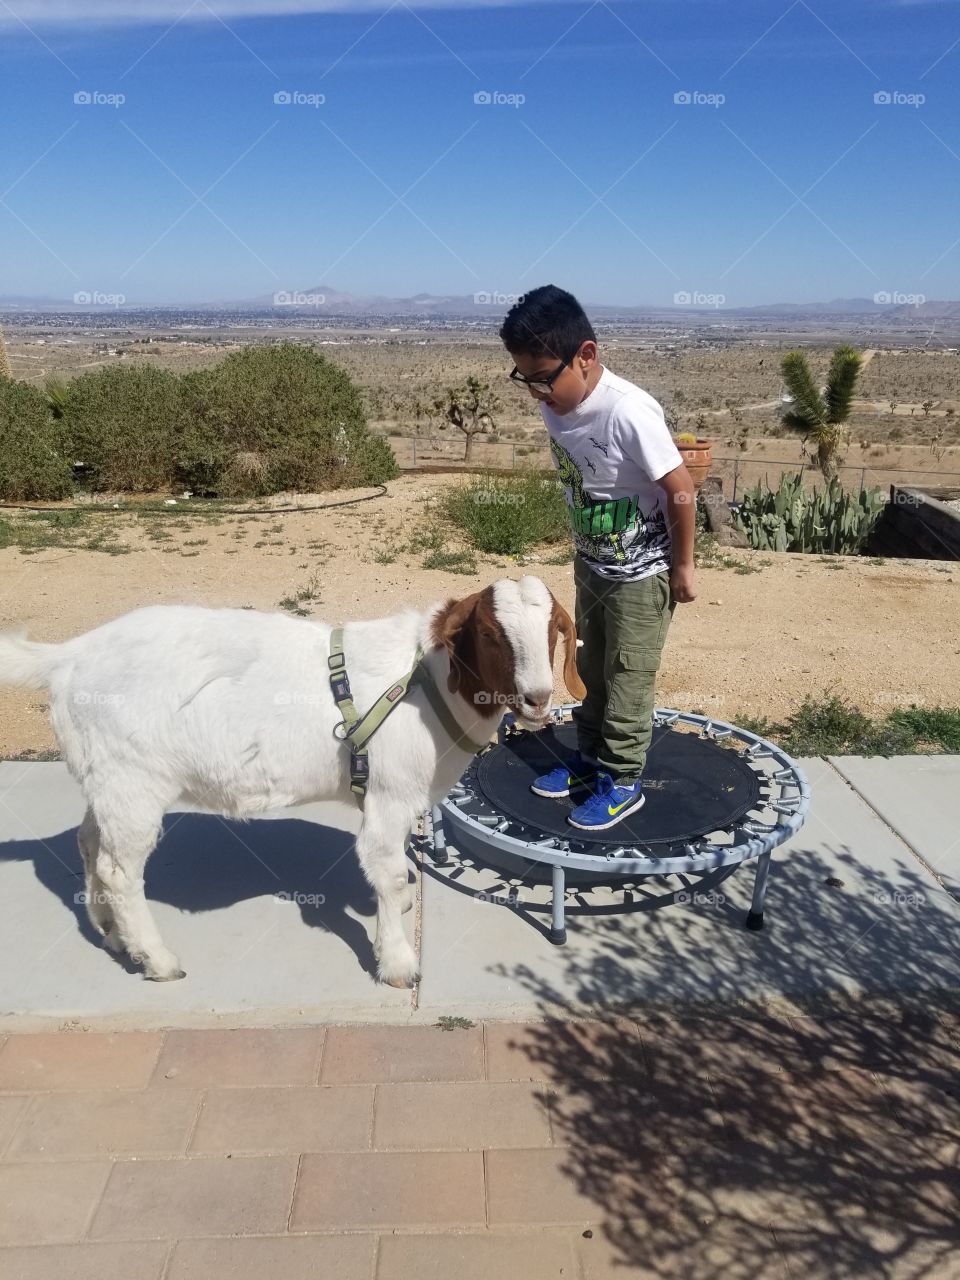 Small child toddler boy jumping & playing on small trampoline with a while goat watching and playing together on a small farm in the Mojave Desert at the back yard on a hot summer day.